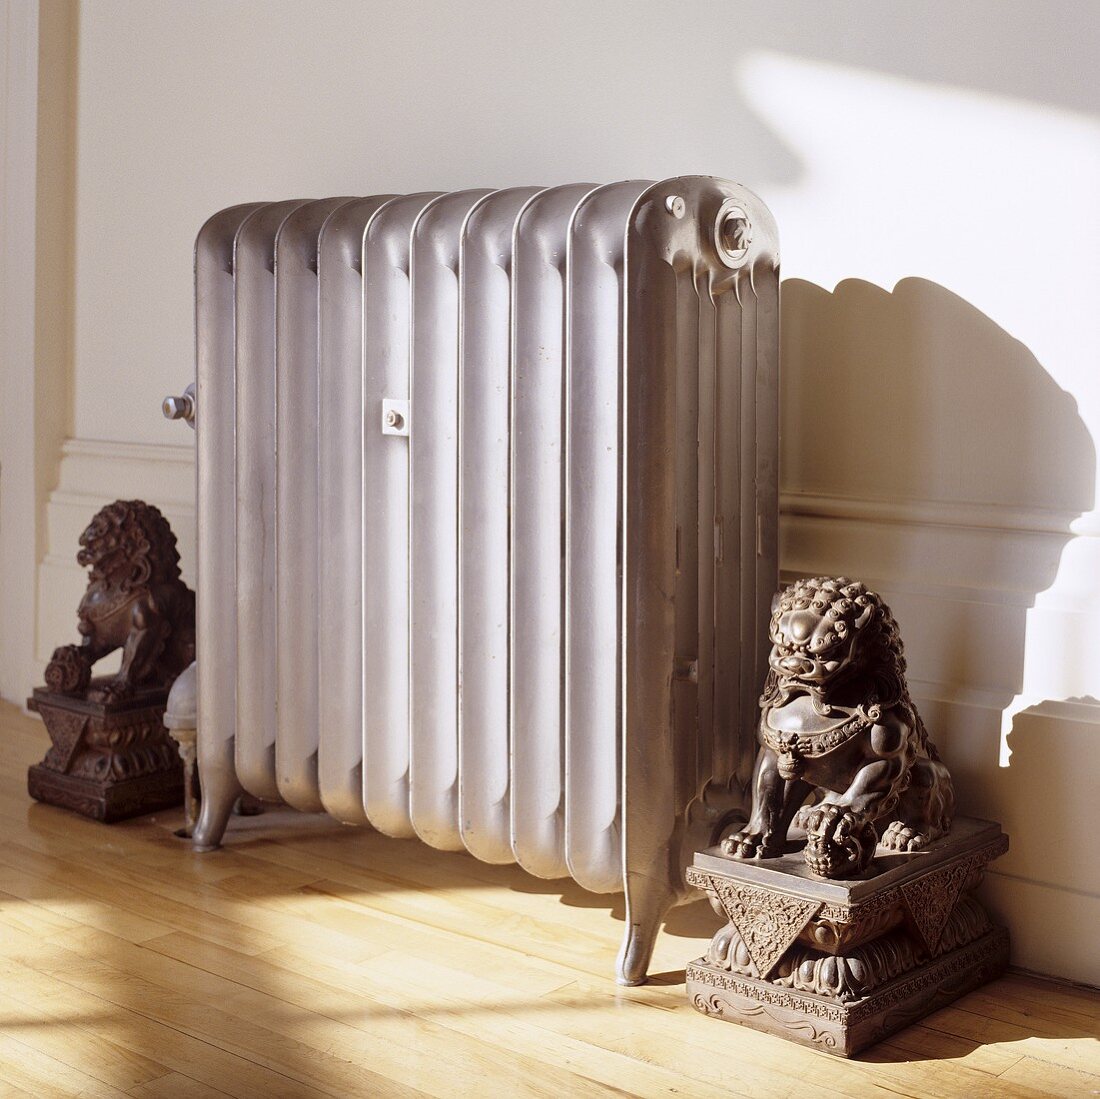 An old grey radiator guarded by lion figures